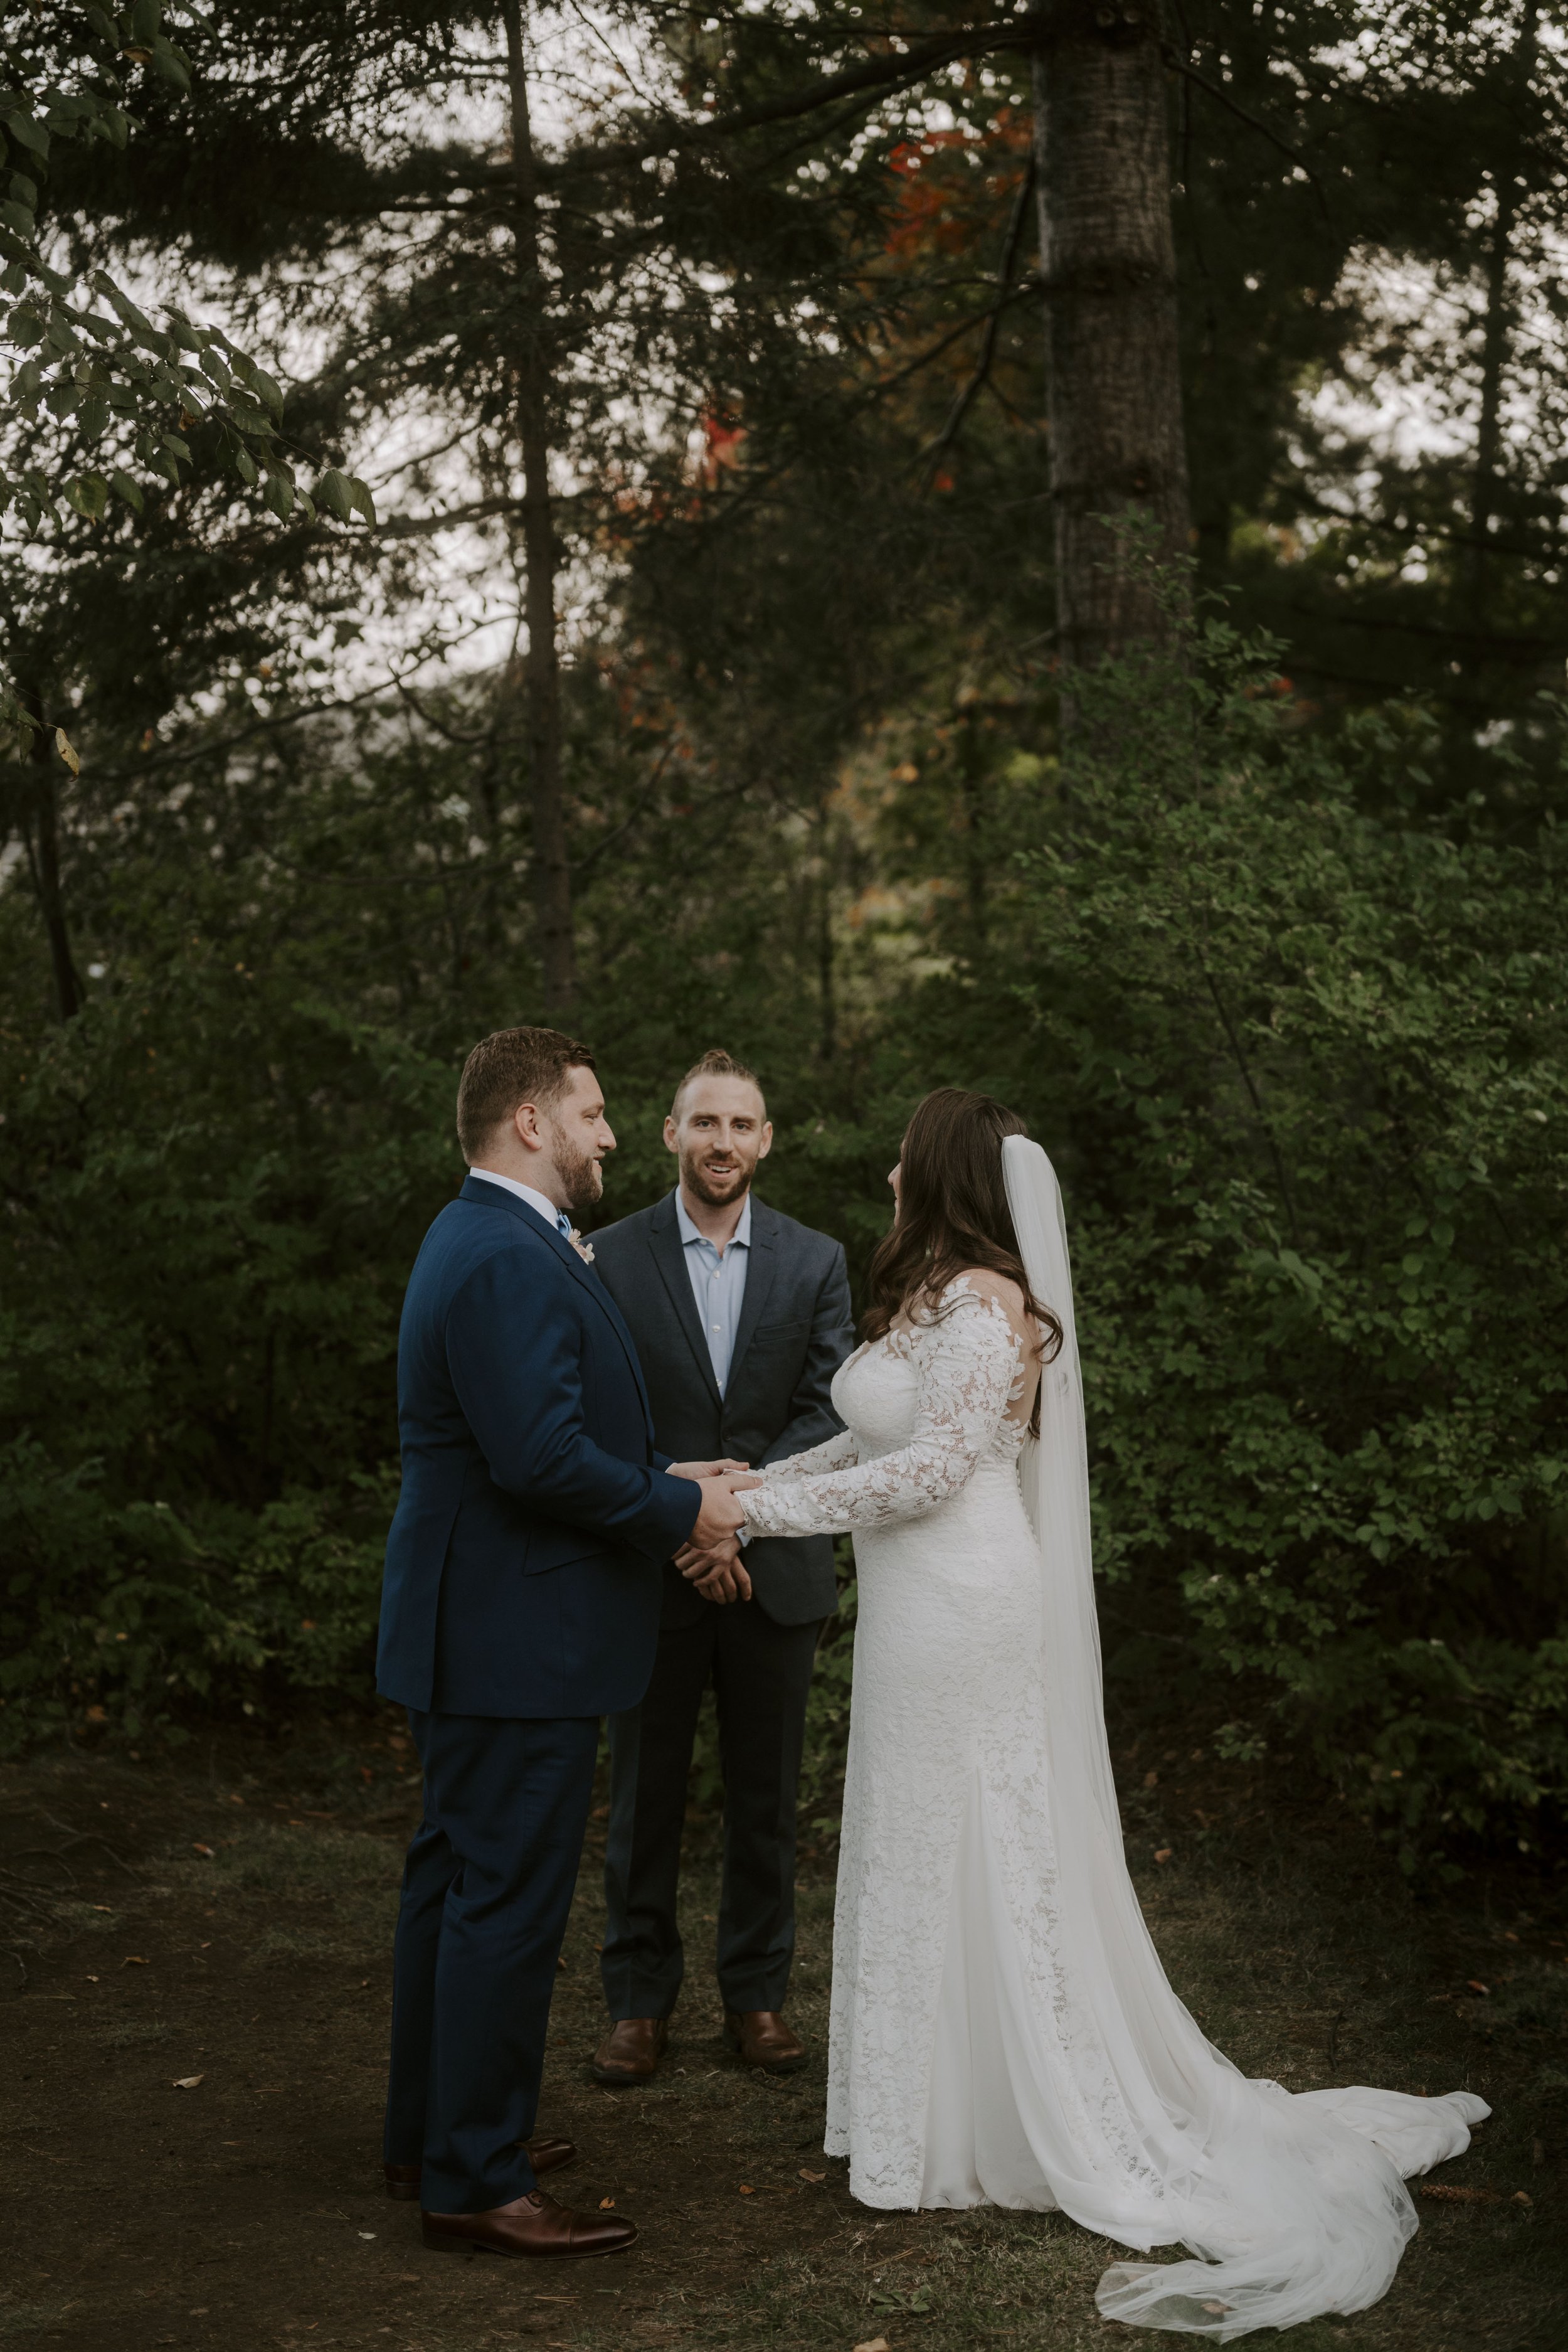 A fall wedding at The Cottage at Mirrow Lake in Lake Placid New York